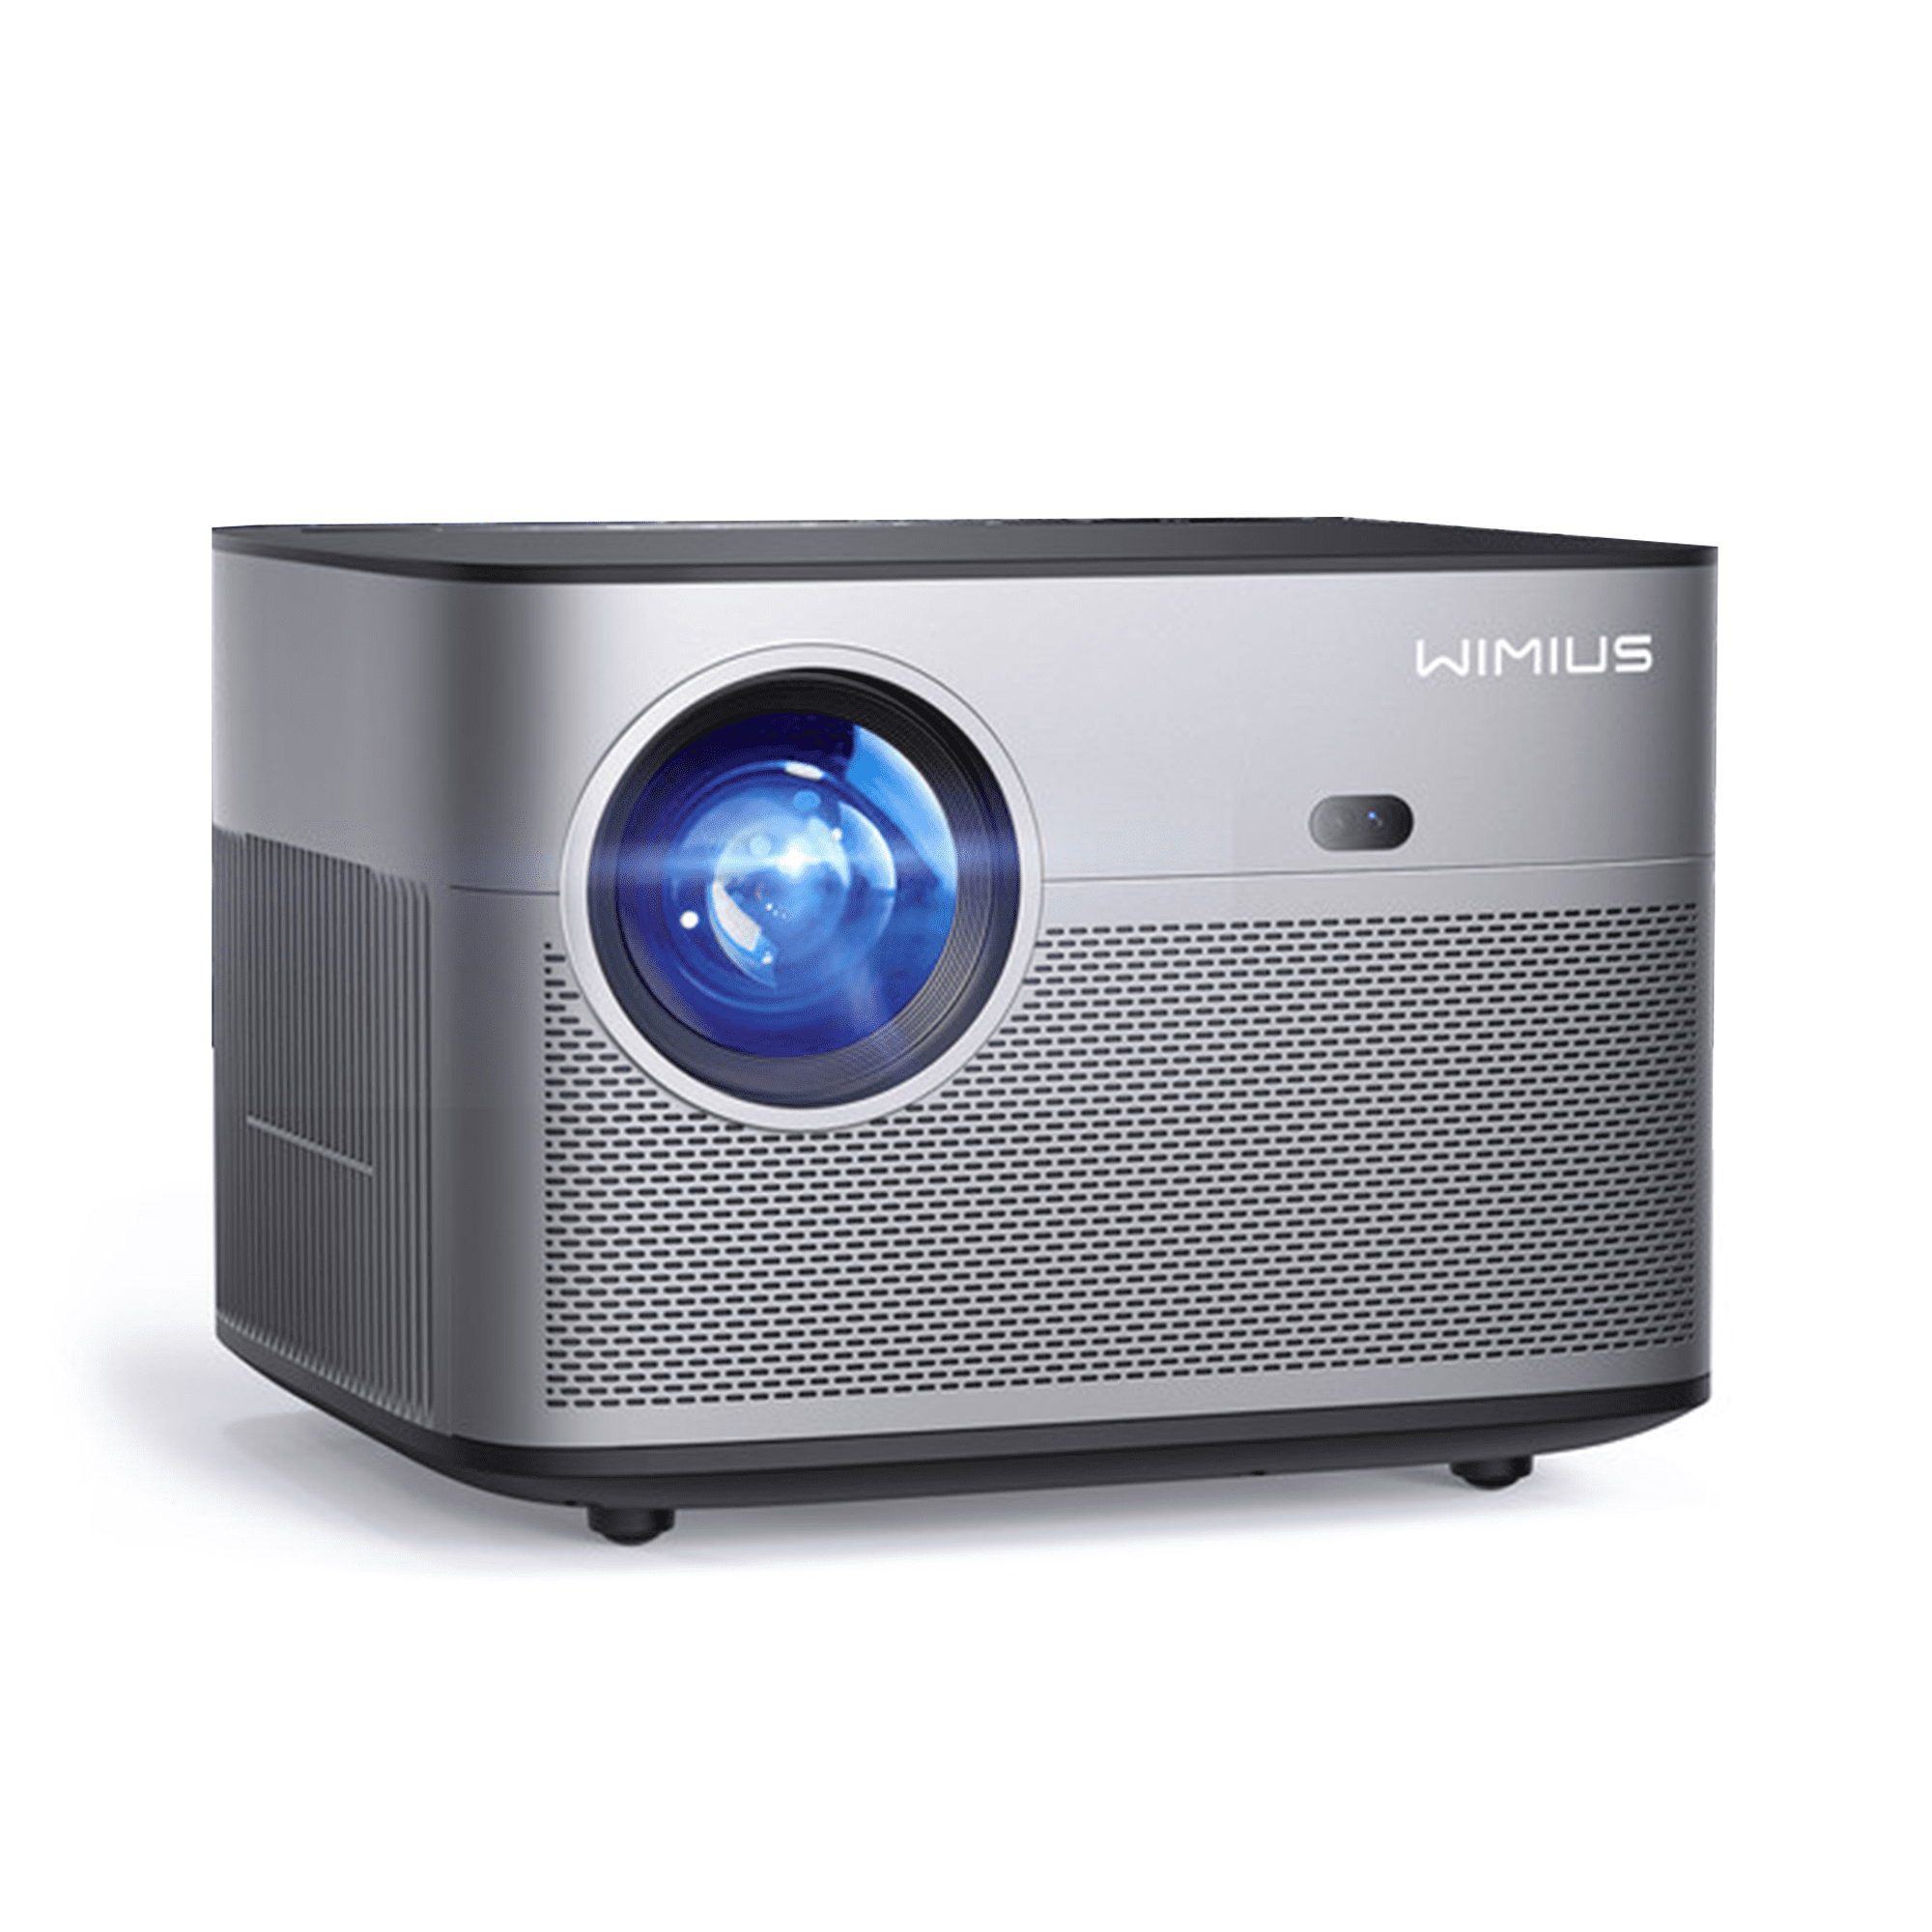 [Auto Focus/Keystone] 4K Projector with WiFi 6 and Bluetooth 5.2, FHD  Native 1080P WiMiUS P64 Outdoor Movie Proyector, 50% Zoom, Home Projector